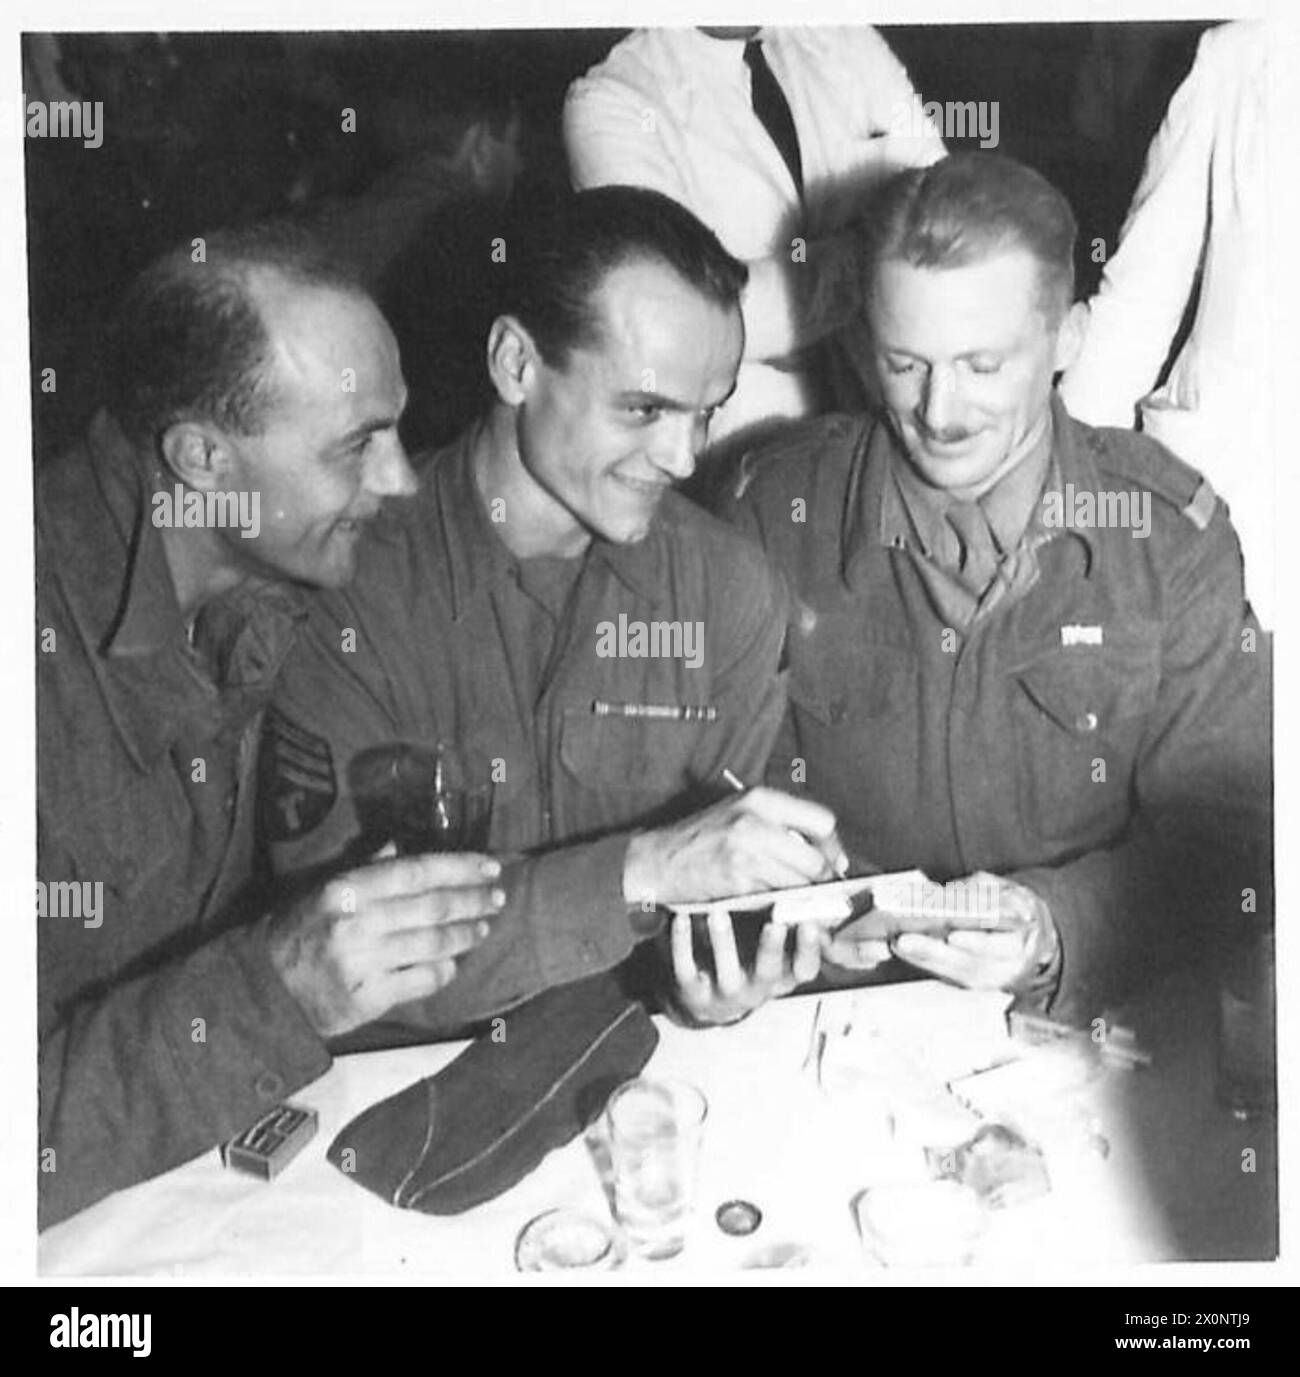 FIFTH ARMY : FIELD MARSHAL ALEXANDER ATTENDS SOLDERS' DINNER - An American soldier autographs a comrade's menu. Left to right:- Gnr. R. Westlake of Springs, Transvaal; Sgt. Bob Yates of Los Angeles, California, Sgt. Major D.L. Clamp of Johannesburg. Photographic negative , British Army Stock Photo